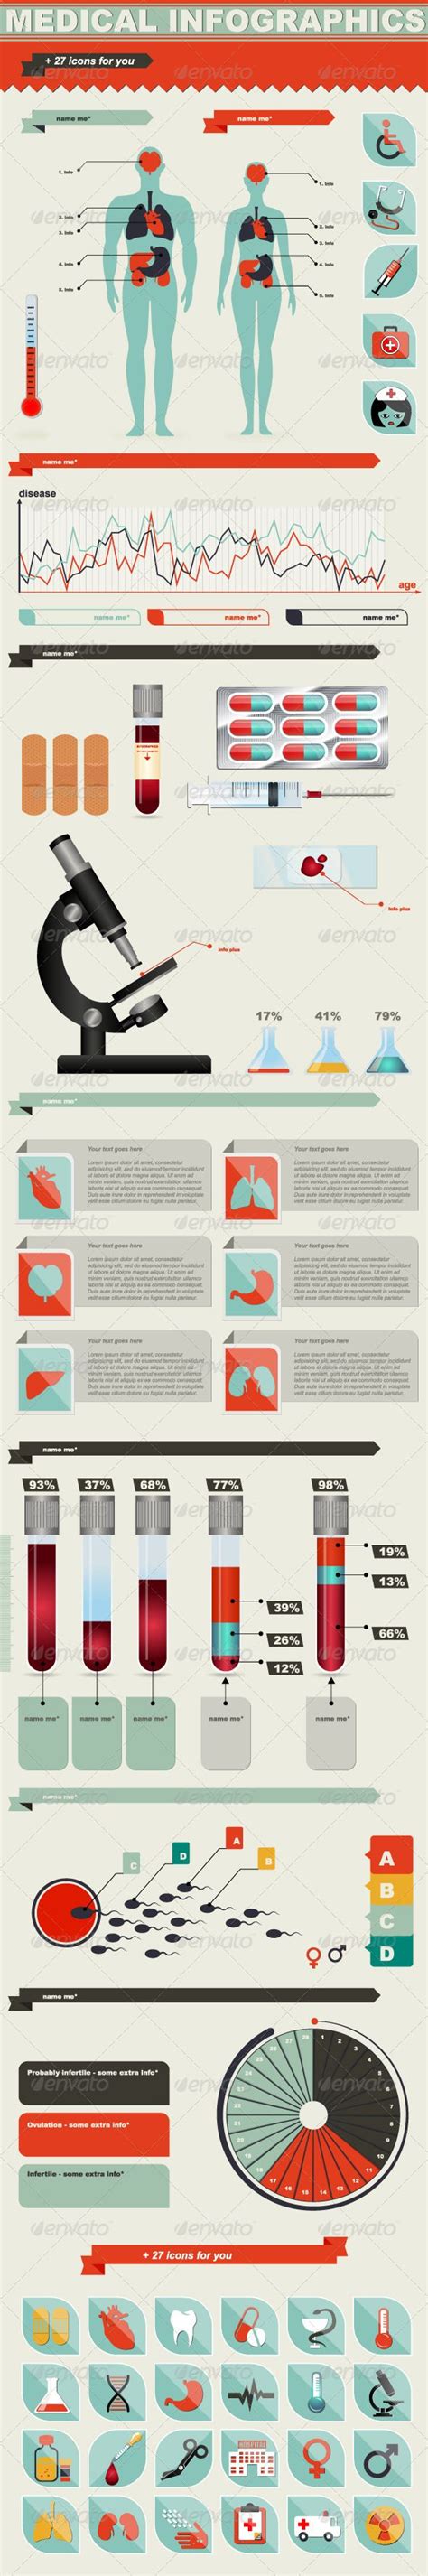 Medical Infographic Vectors Medical Infographics Graphicriver